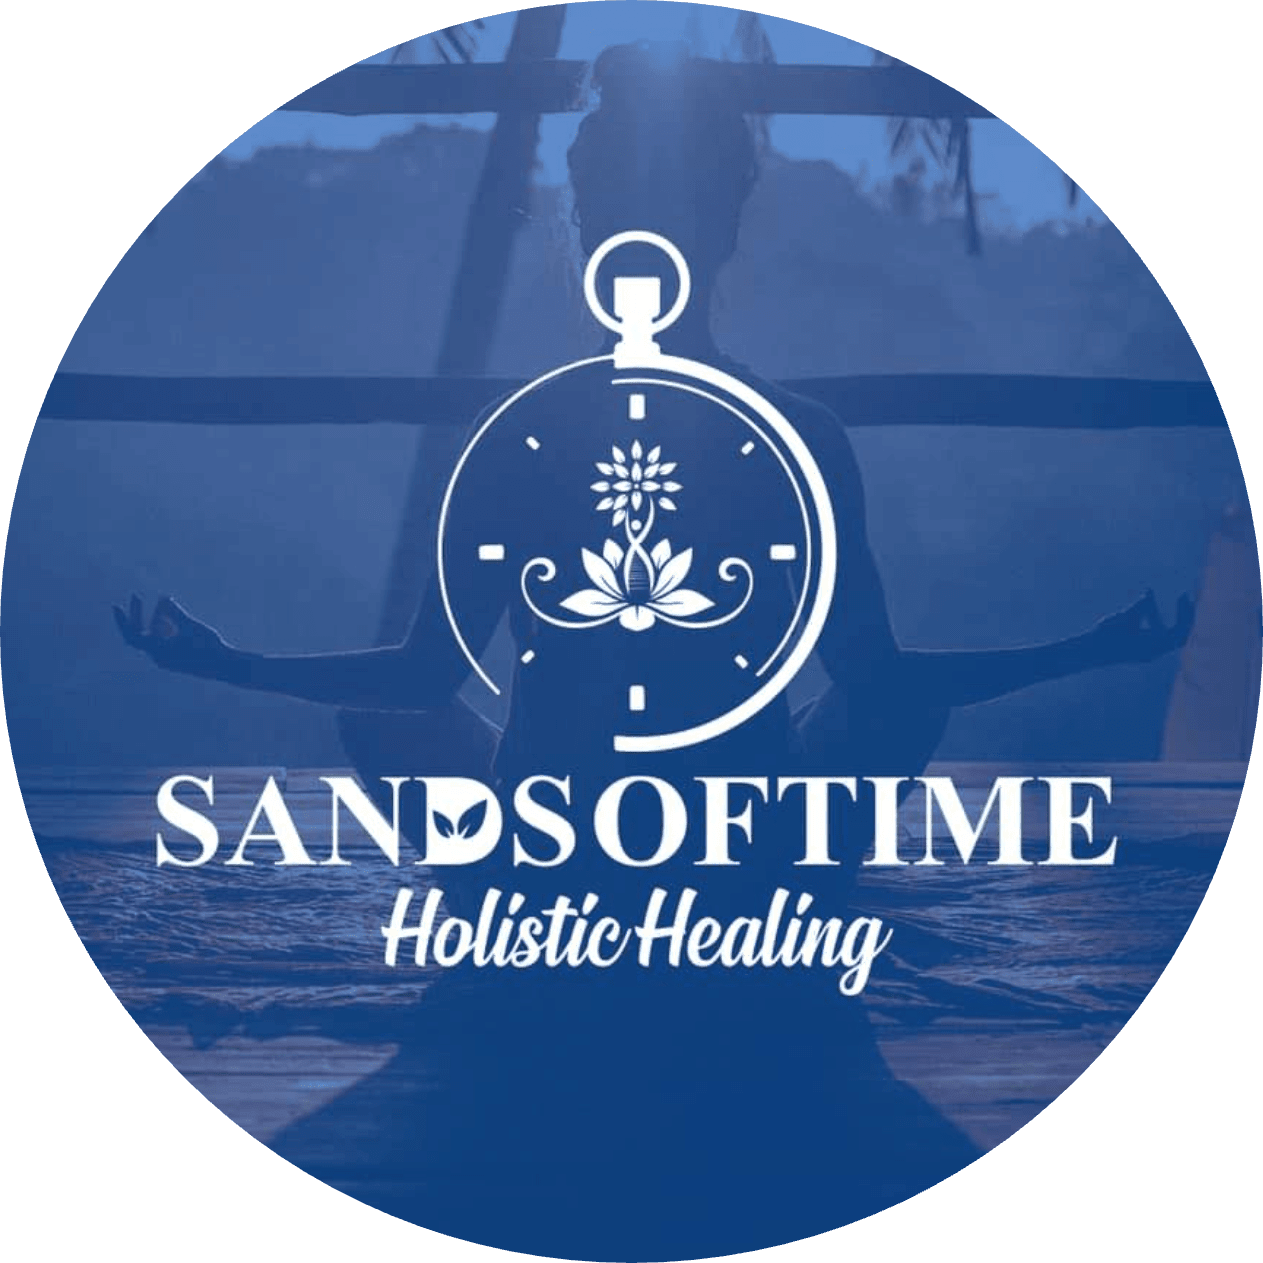 Sands of Time Holistic Healing